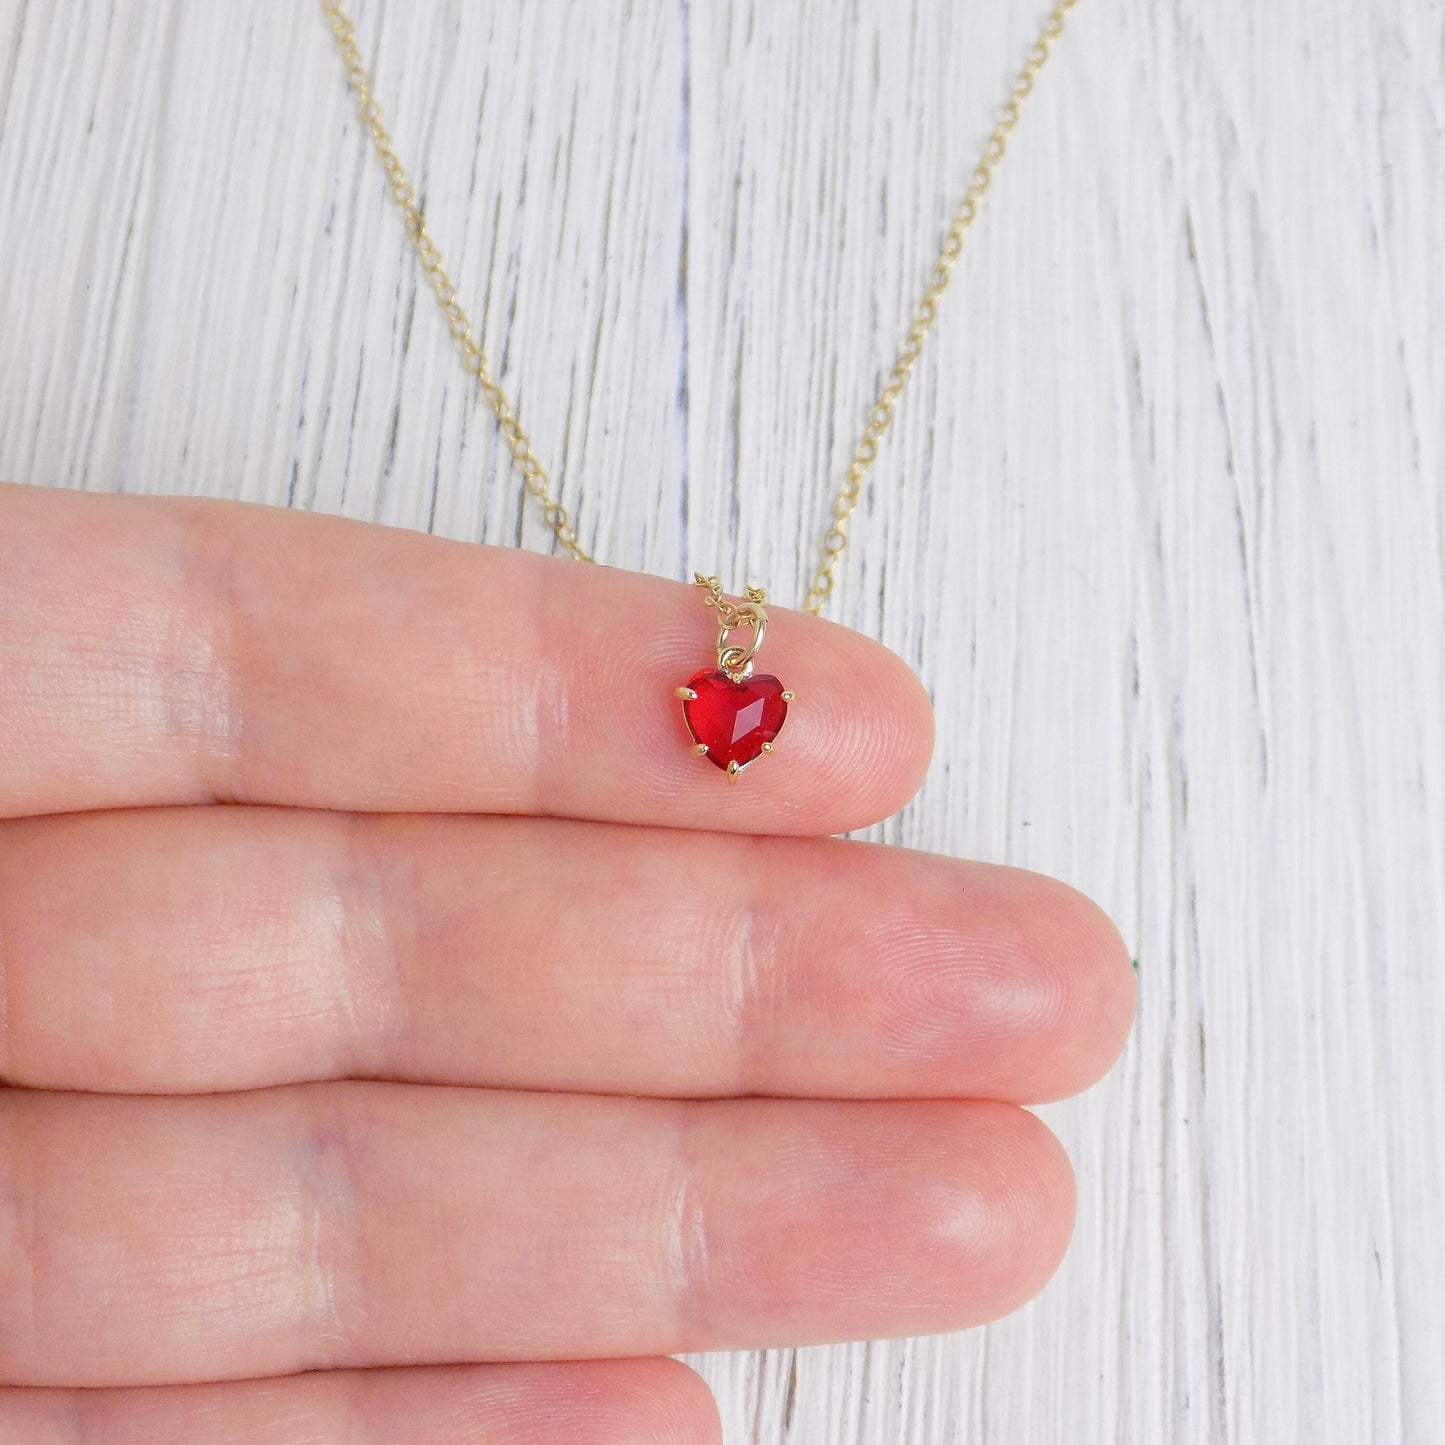 Tiny Heart Necklace Gold, Red Heart Charm Cubic Zirconia Stone, Gift For Her, M6-25